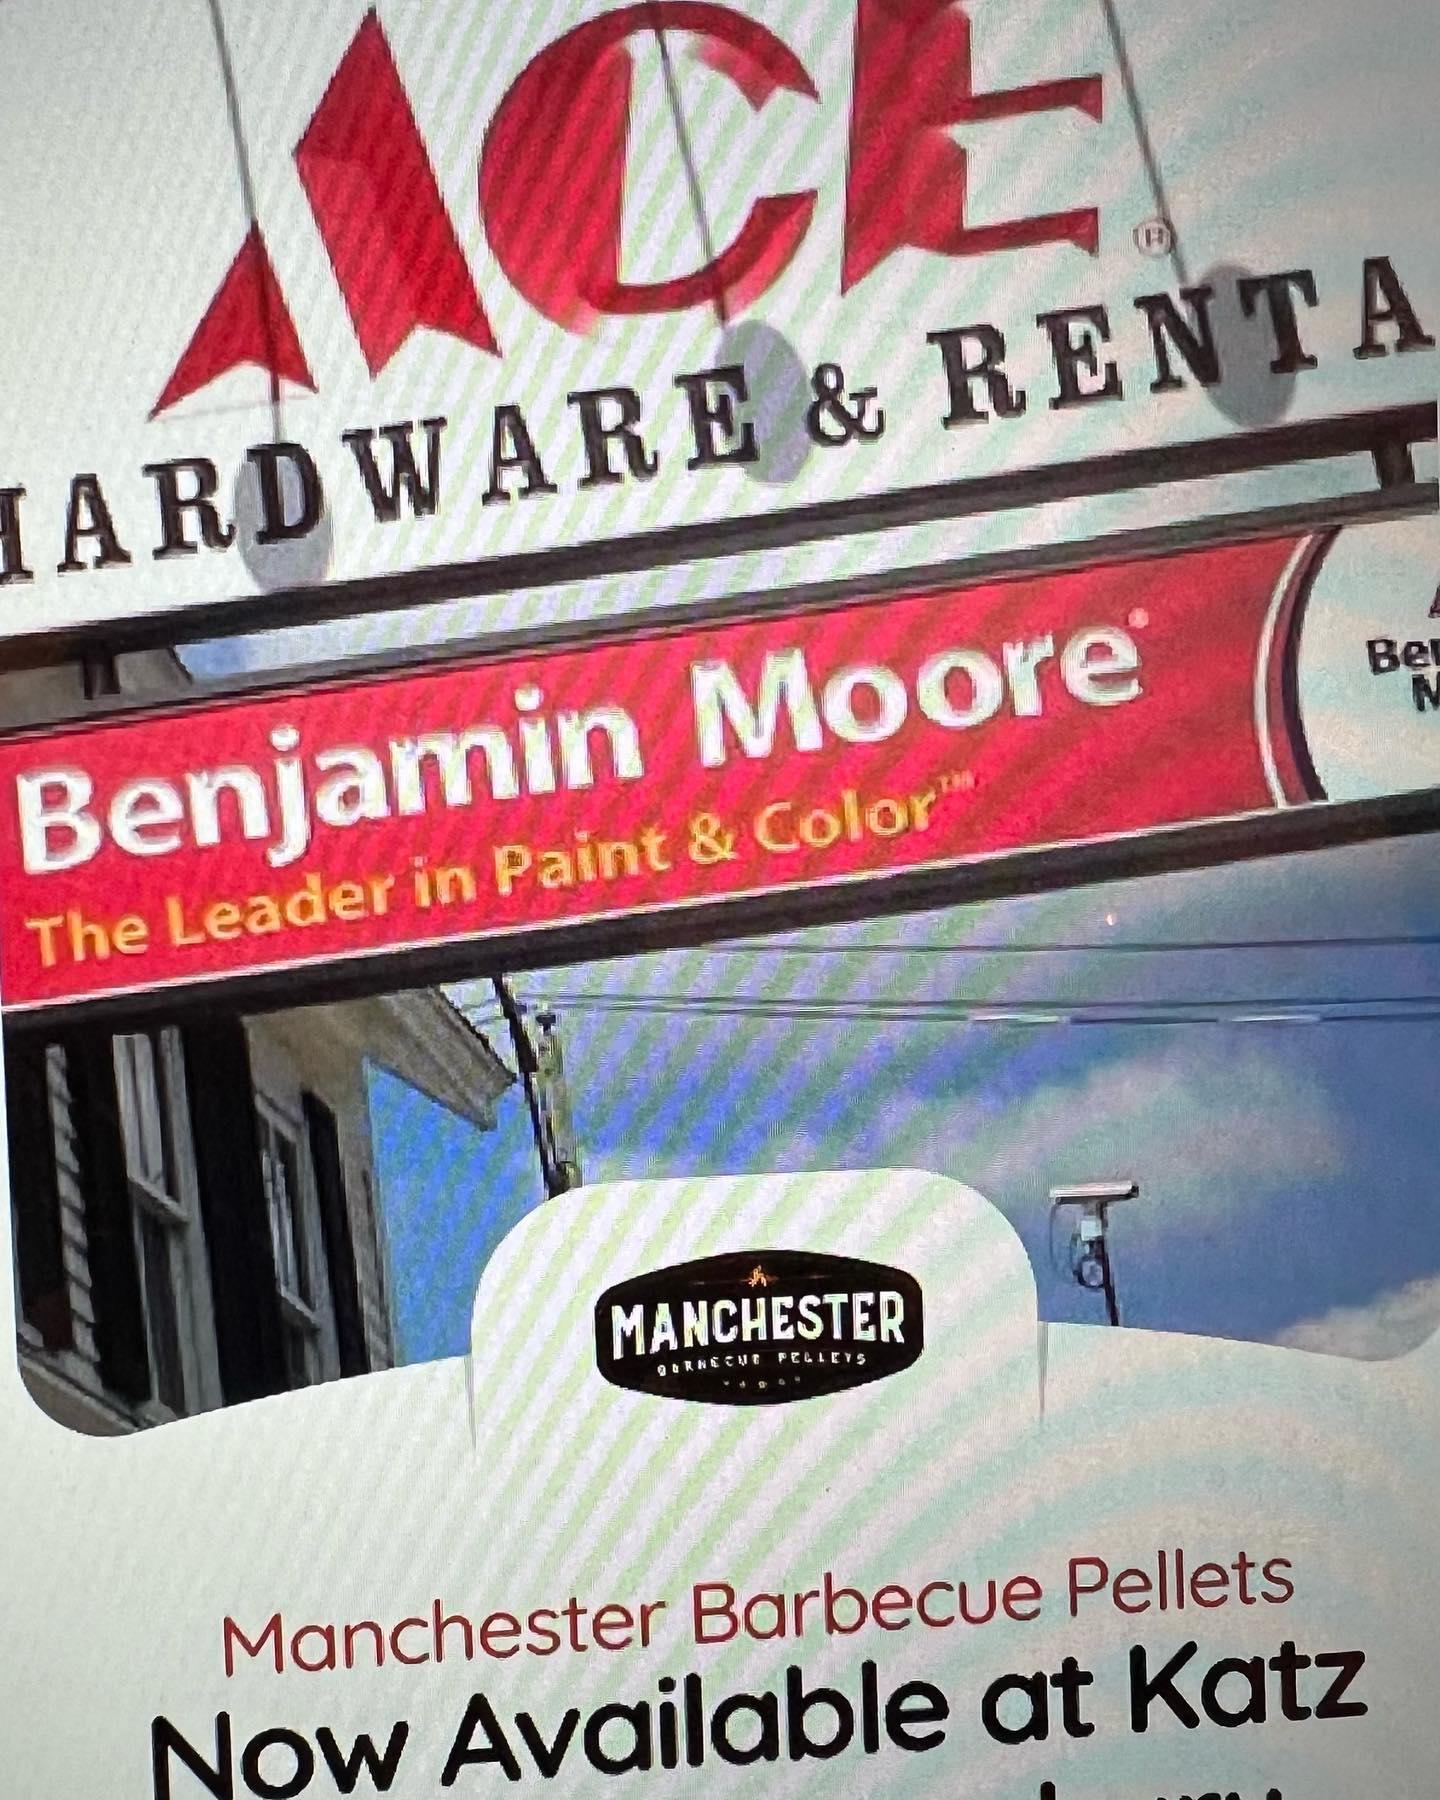 Manchester Barbecue Pellets are now available at Katz Hardware in Glastonbury!